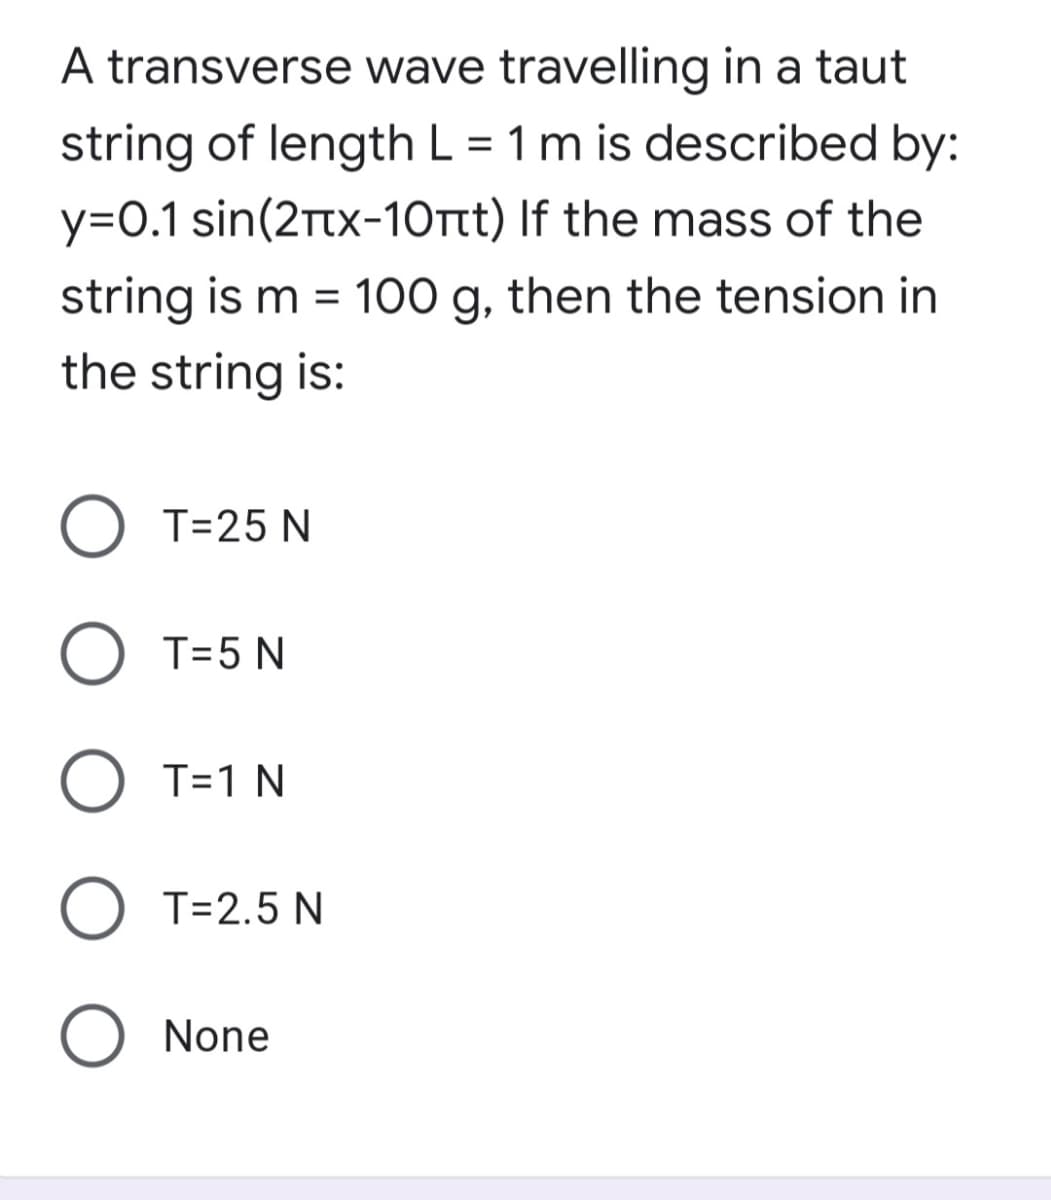 A transverse wave travelling in a taut
string of length L = 1 m is described by:
y=O.1 sin(2tx-10ttt) If the mass of the
string is m = 100 g, then the tension in
the string is:
O T=25 N
O T=5 N
O T=1 N
O T=2.5 N
O None
